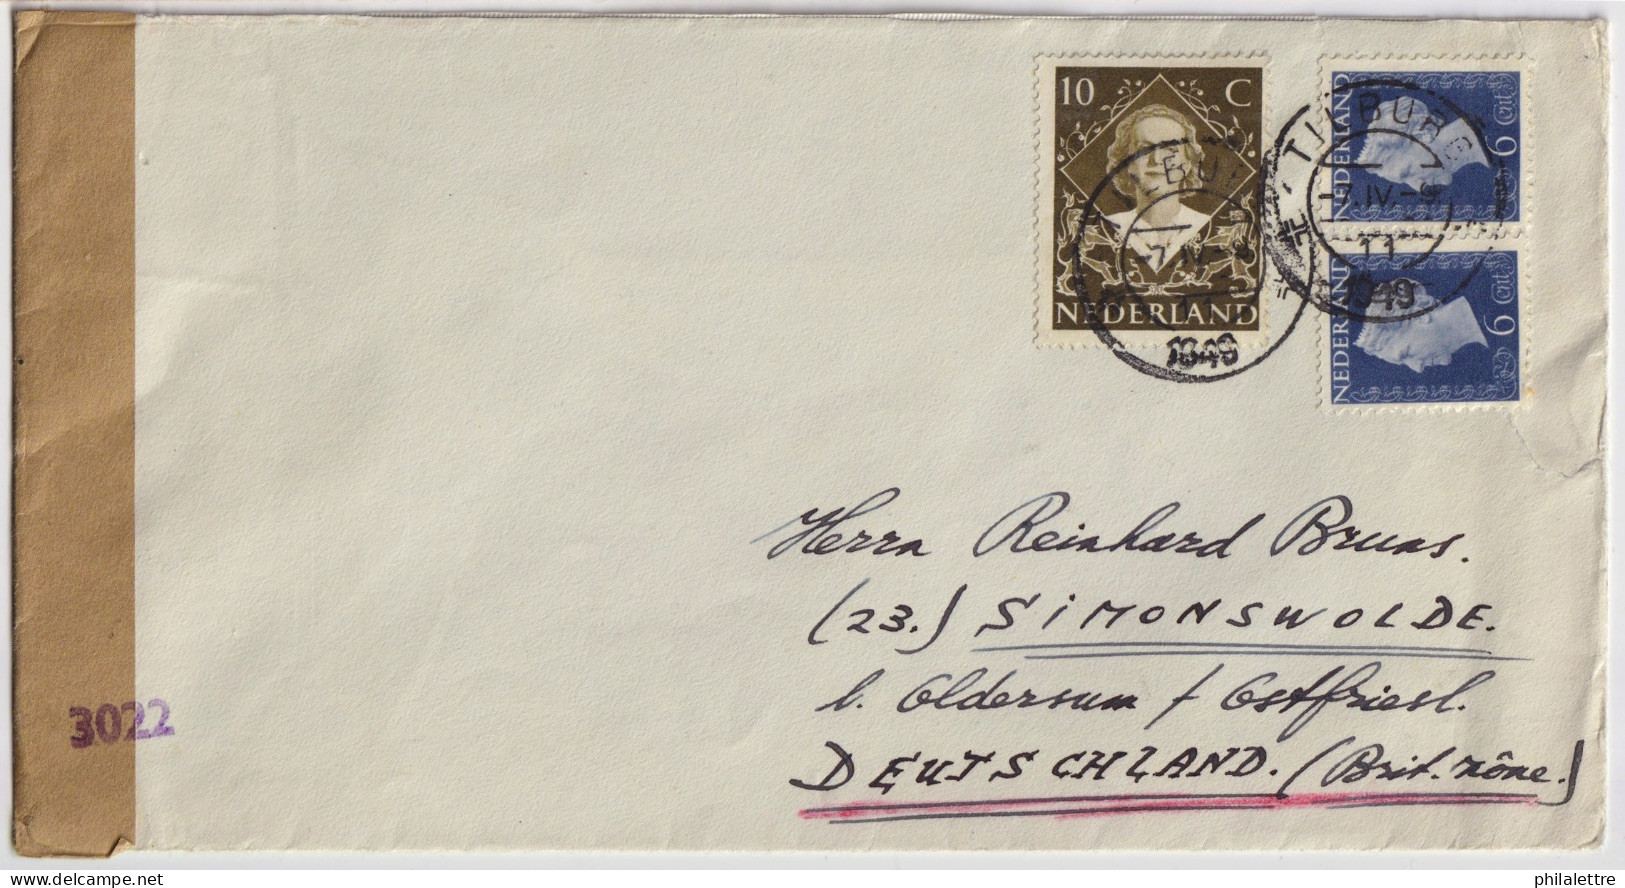 PAYS-BAS / THE NETHERLANDS - 1949 Mi.479 (x2) & Mi.609 On Censored Cover From TILBURG To SIMONSWOLDE, Germany - Lettres & Documents